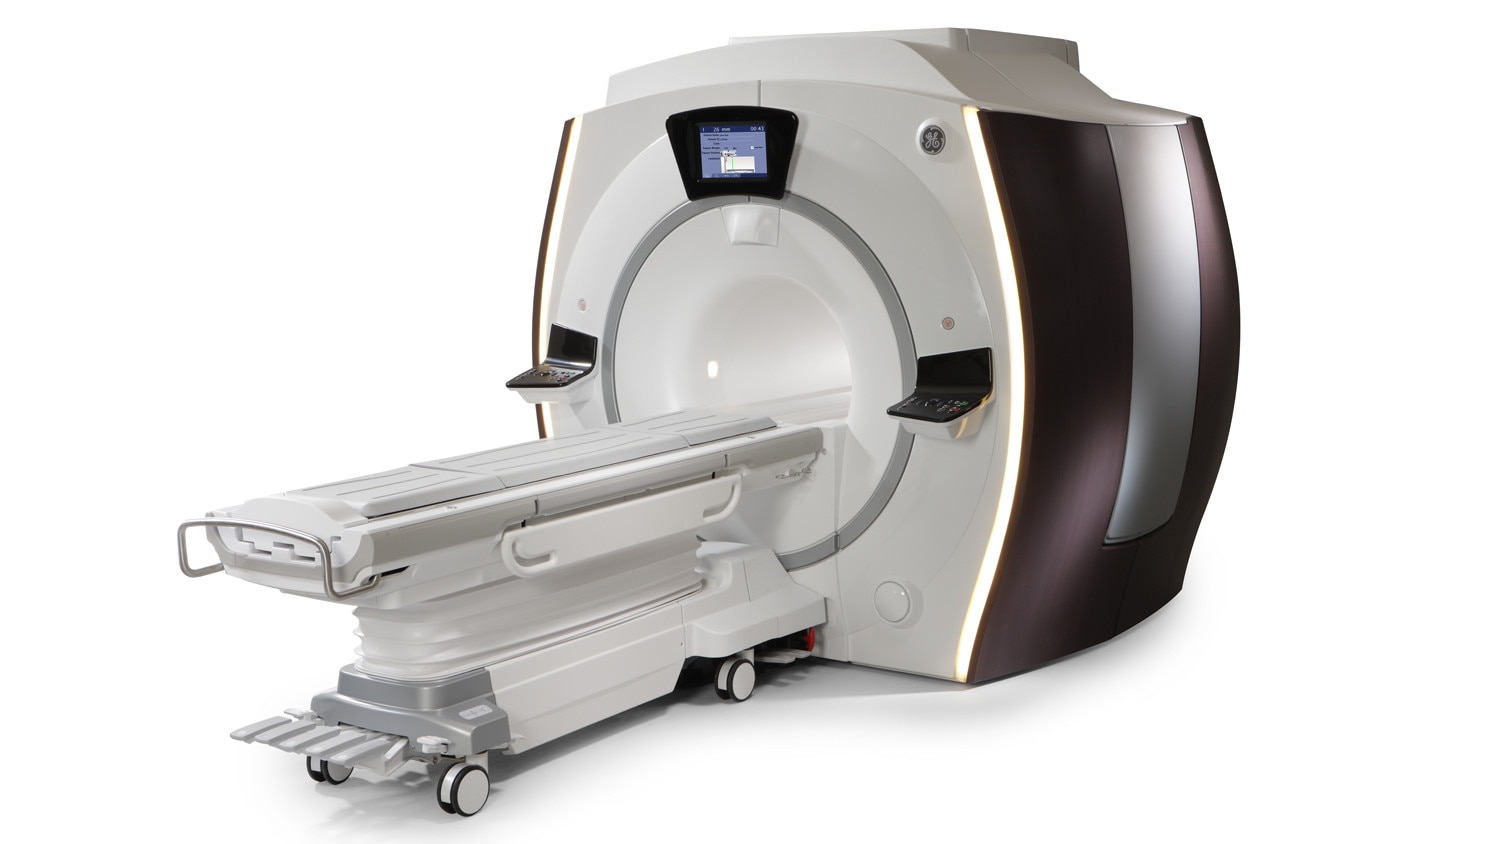 categories-magnetic-resonance-imaging-discovery-mr750w-3-0t-discoverymr750w30tproduct2_jpg